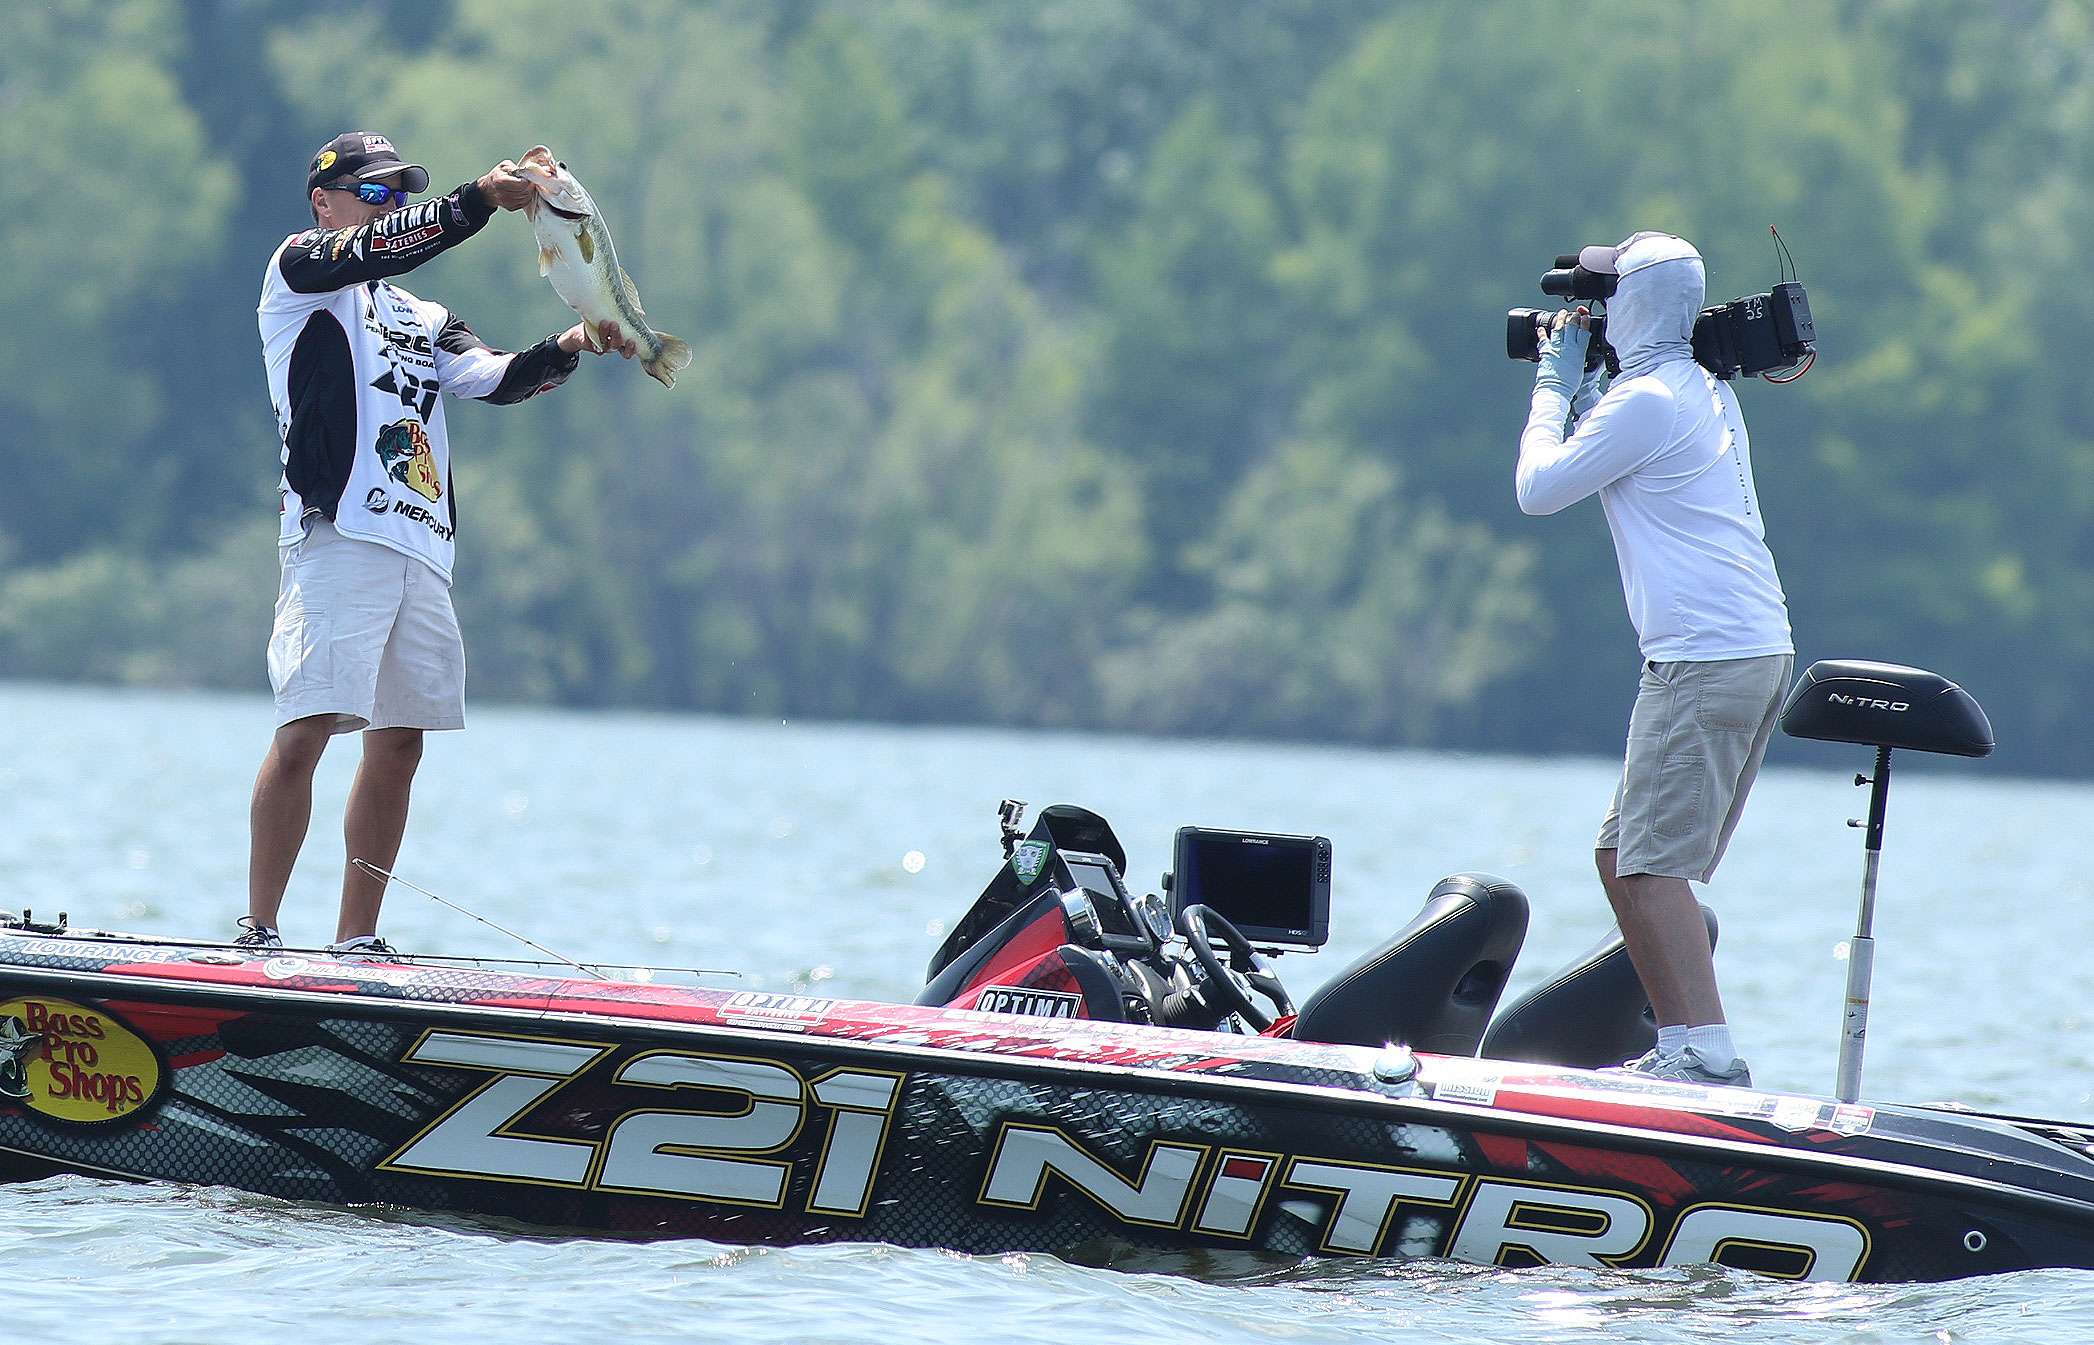 He showed it to the cameras and all the spectators before putting it in the livewell. The fish bit at 1:30 p.m.